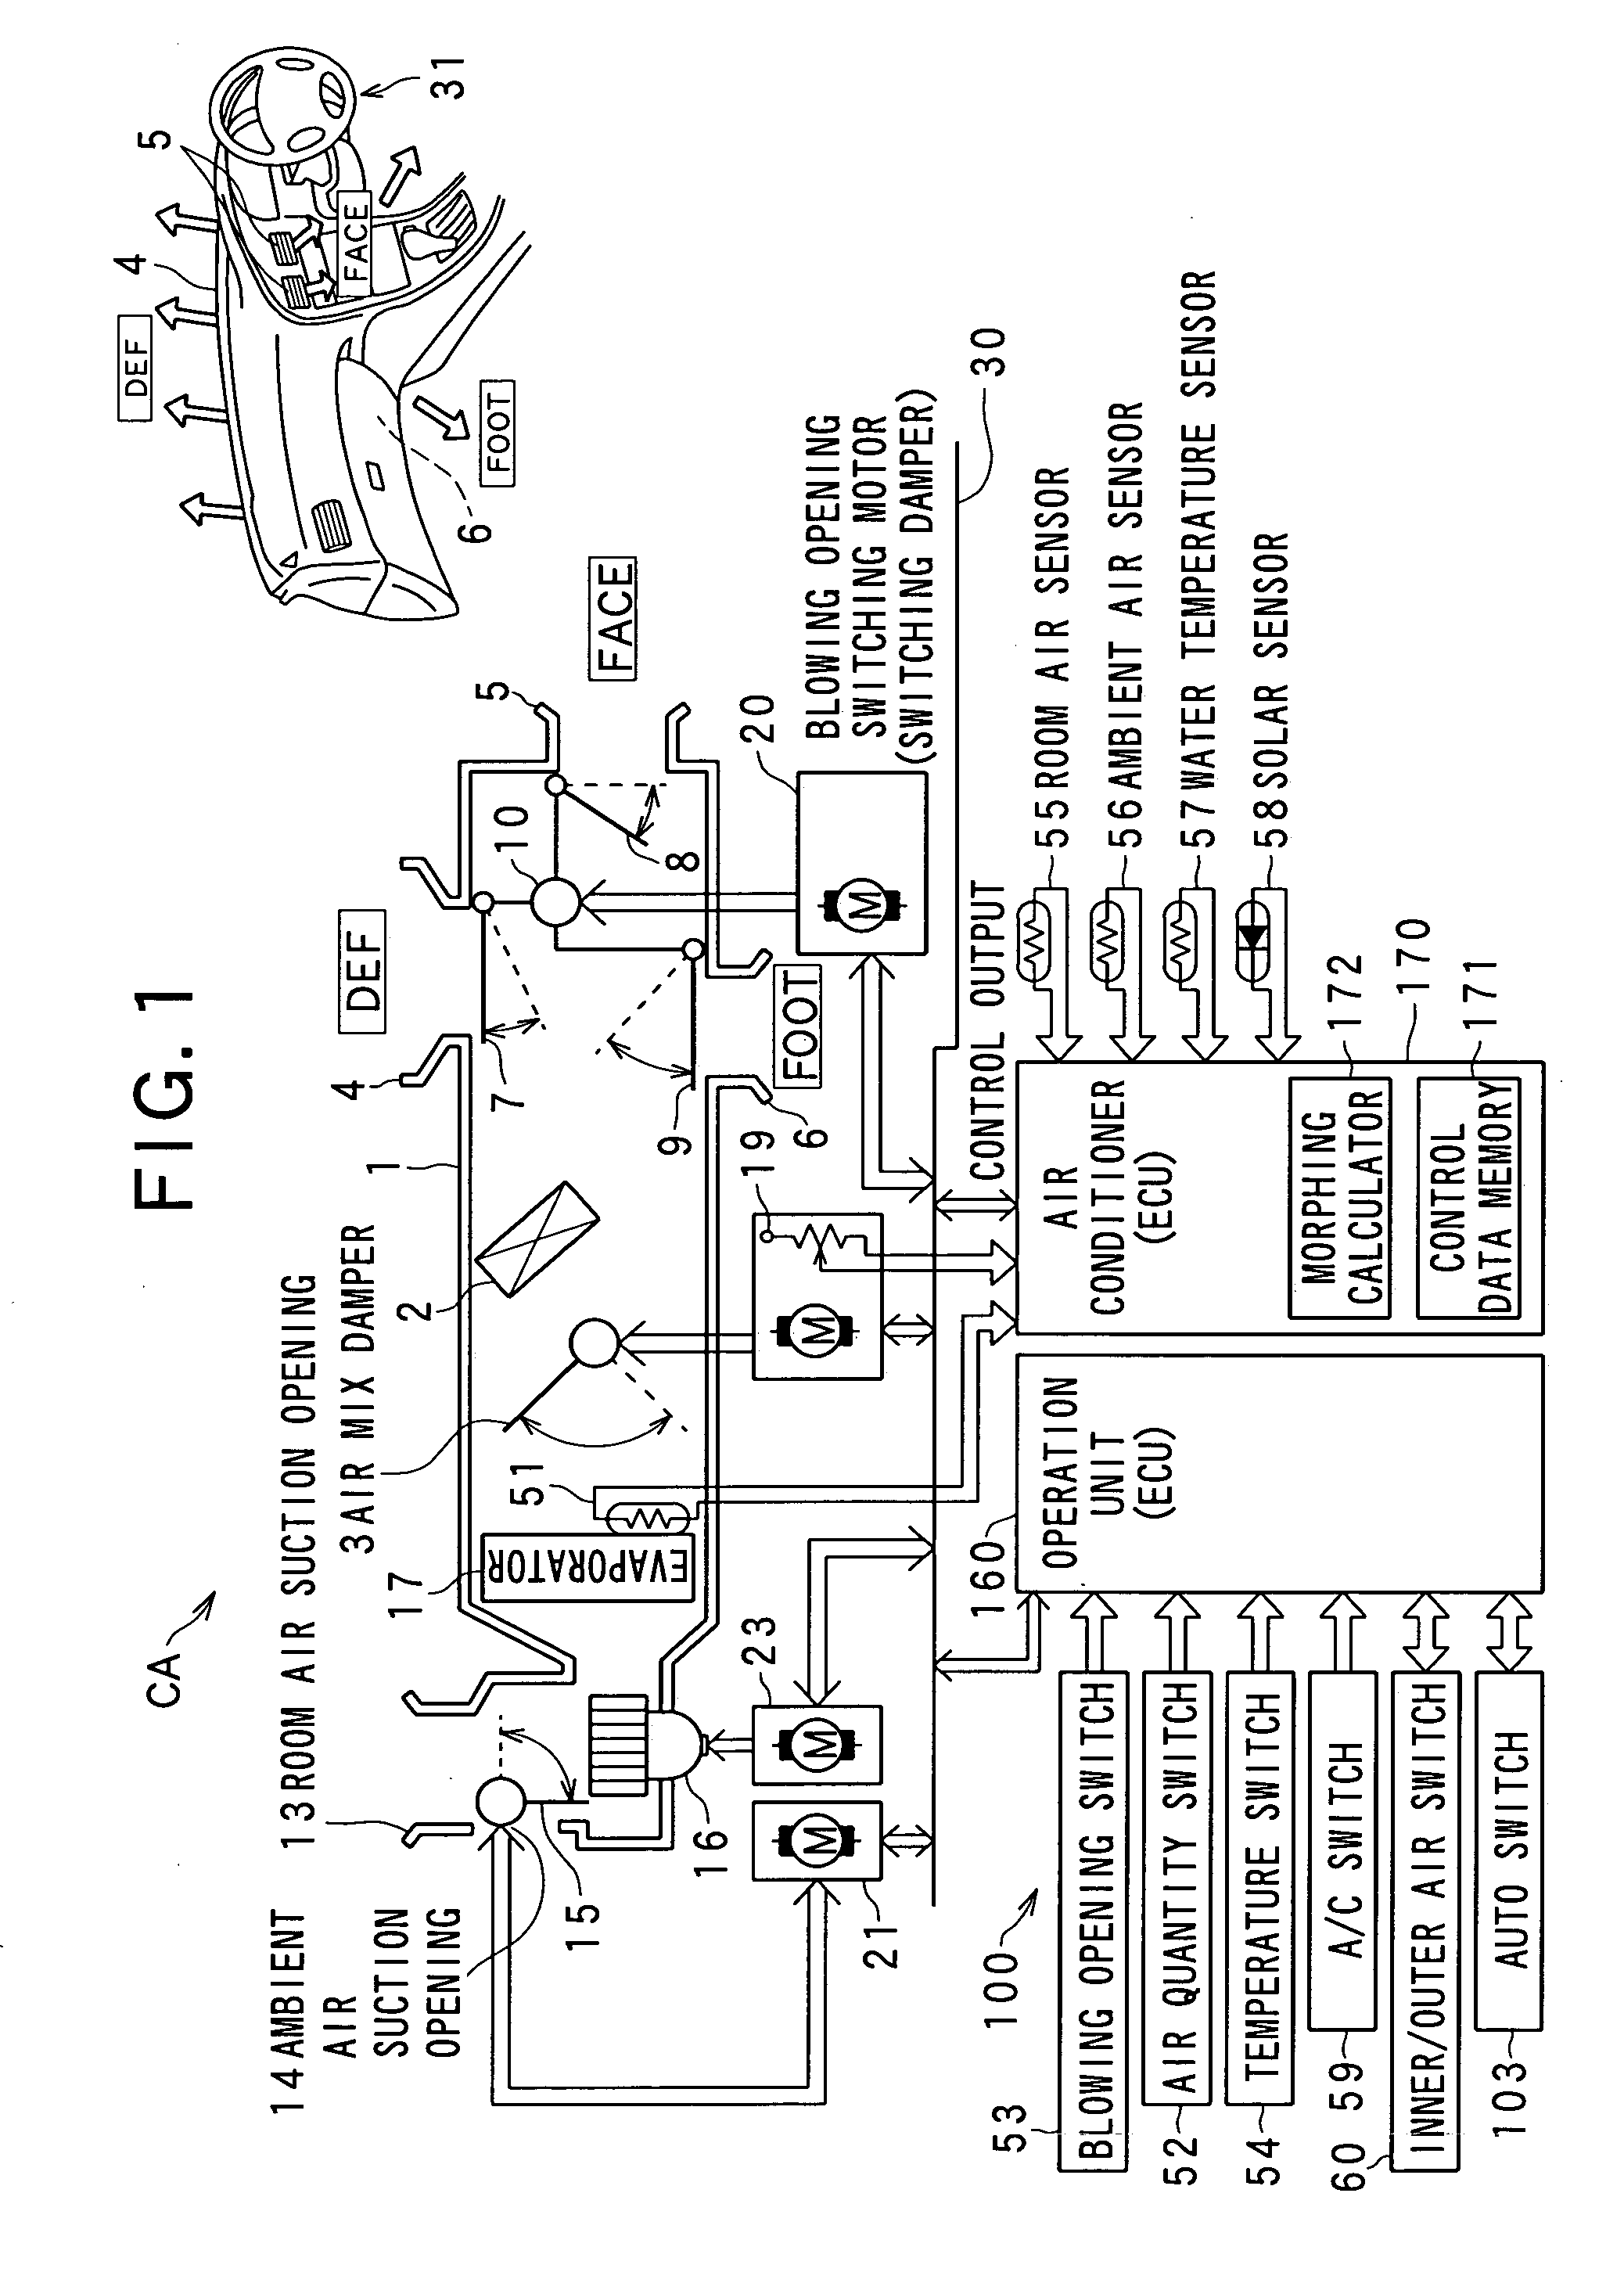 Method and device for controlling equipment based on multiple-input/one-output control